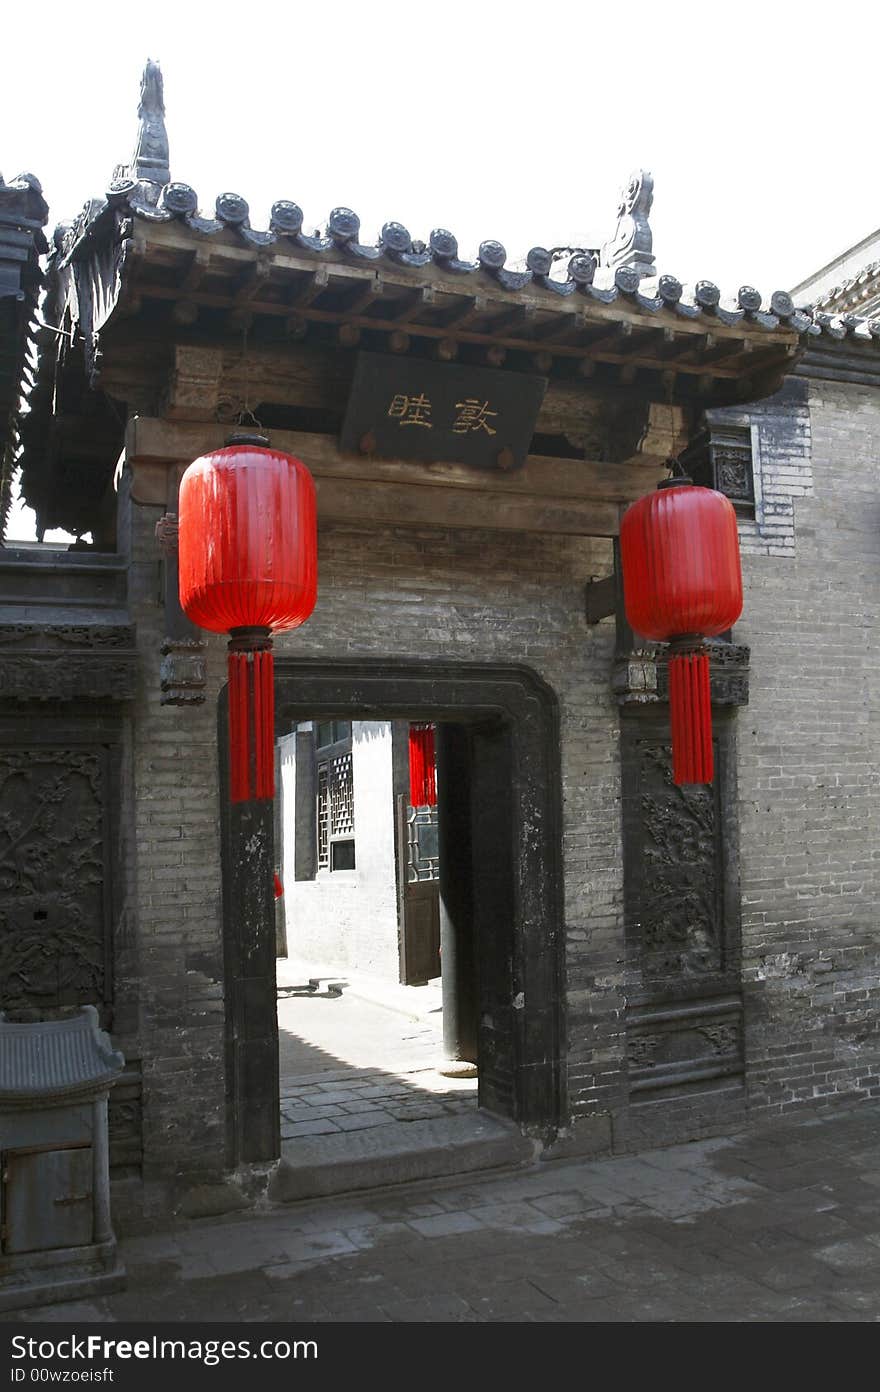 Gate of the old house.It has already had a history of several hundred years.

Chinese on the horizontal inscribed board of the gate is meant harmonically.